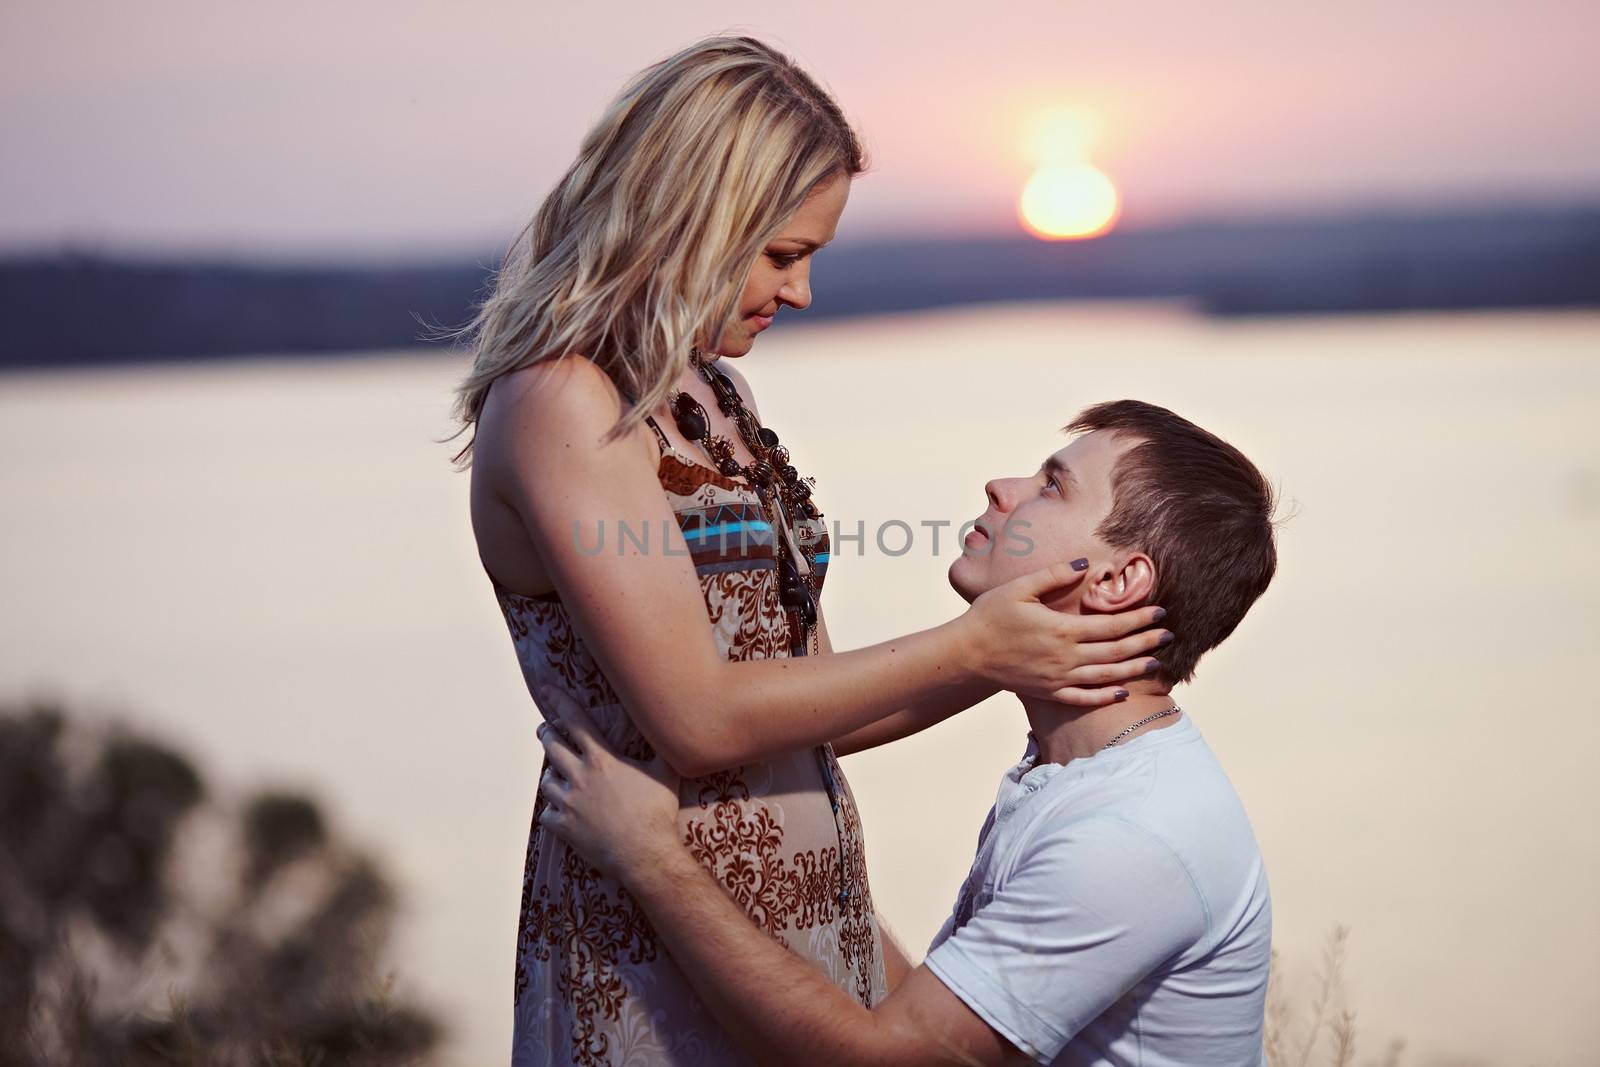 Man makes a marriage proposal at sunset